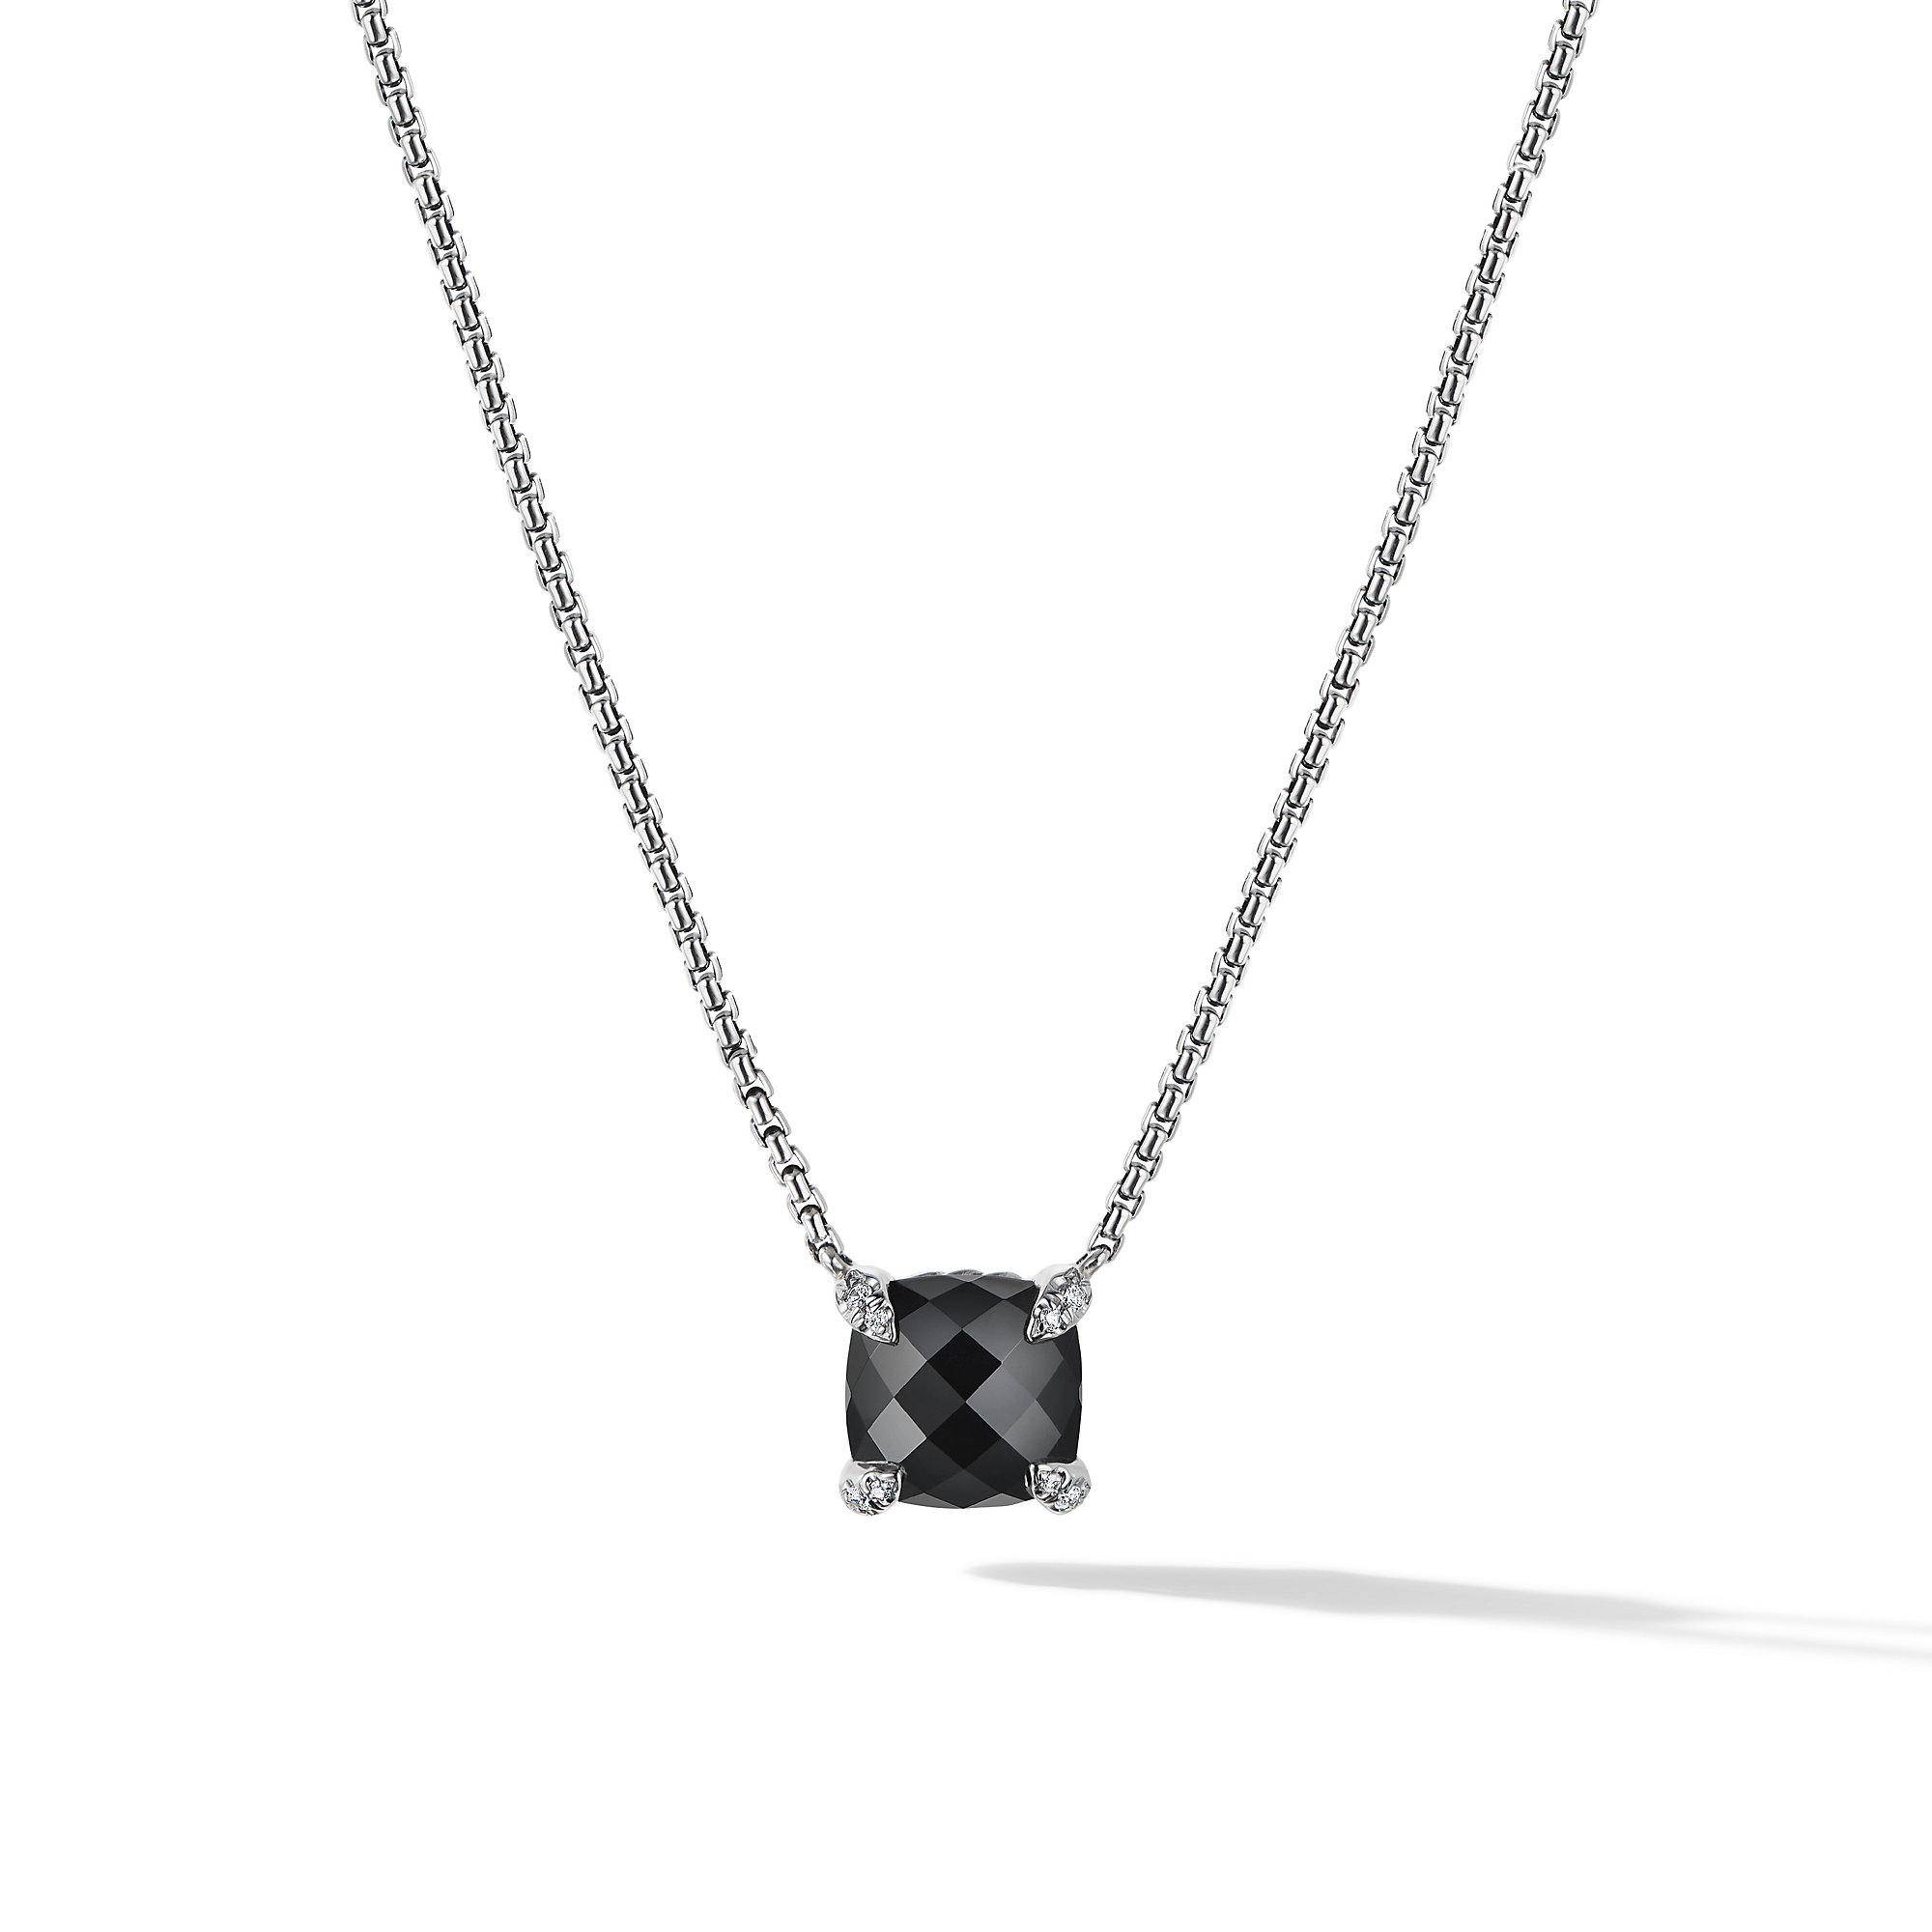 Petite Chatelaine® Pendant Necklace in Sterling Silver with Black Onyx and Pave Diamonds